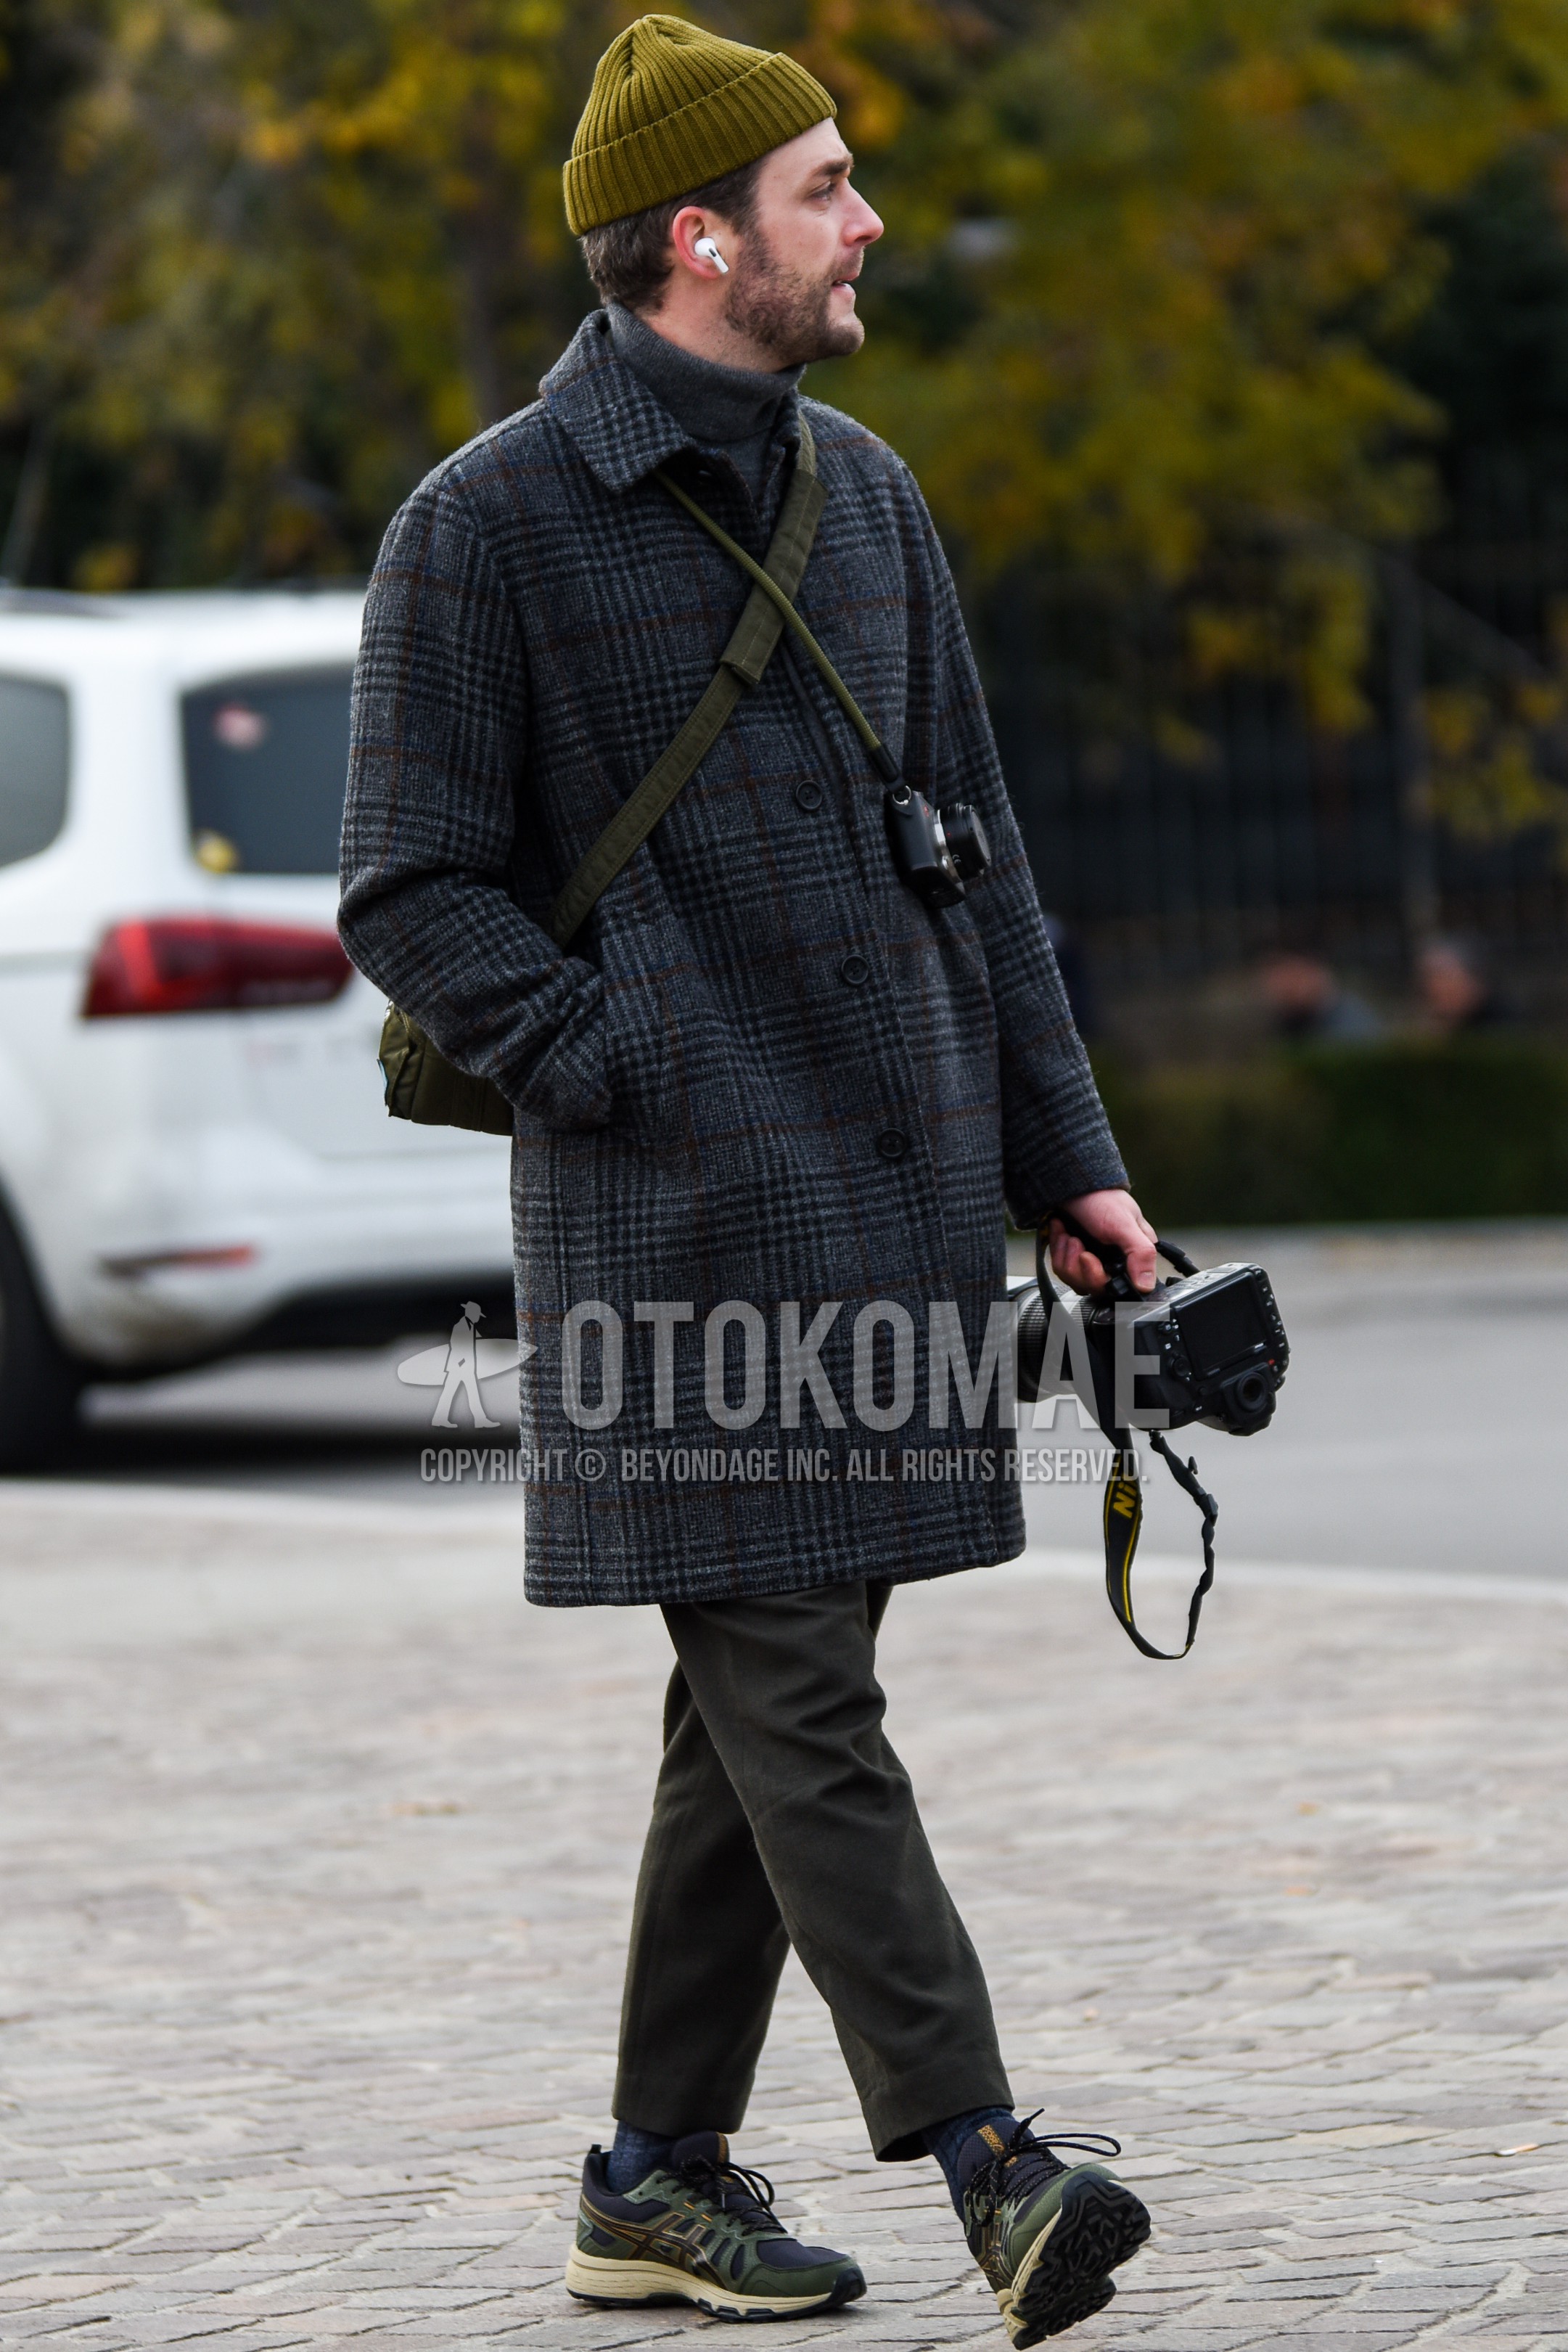 Men's autumn winter outfit with olive green plain knit cap, gray check stenkarrer coat, gray plain turtleneck knit, gray plain slacks, gray plain socks, olive green low-cut sneakers, olive green plain shoulder bag.